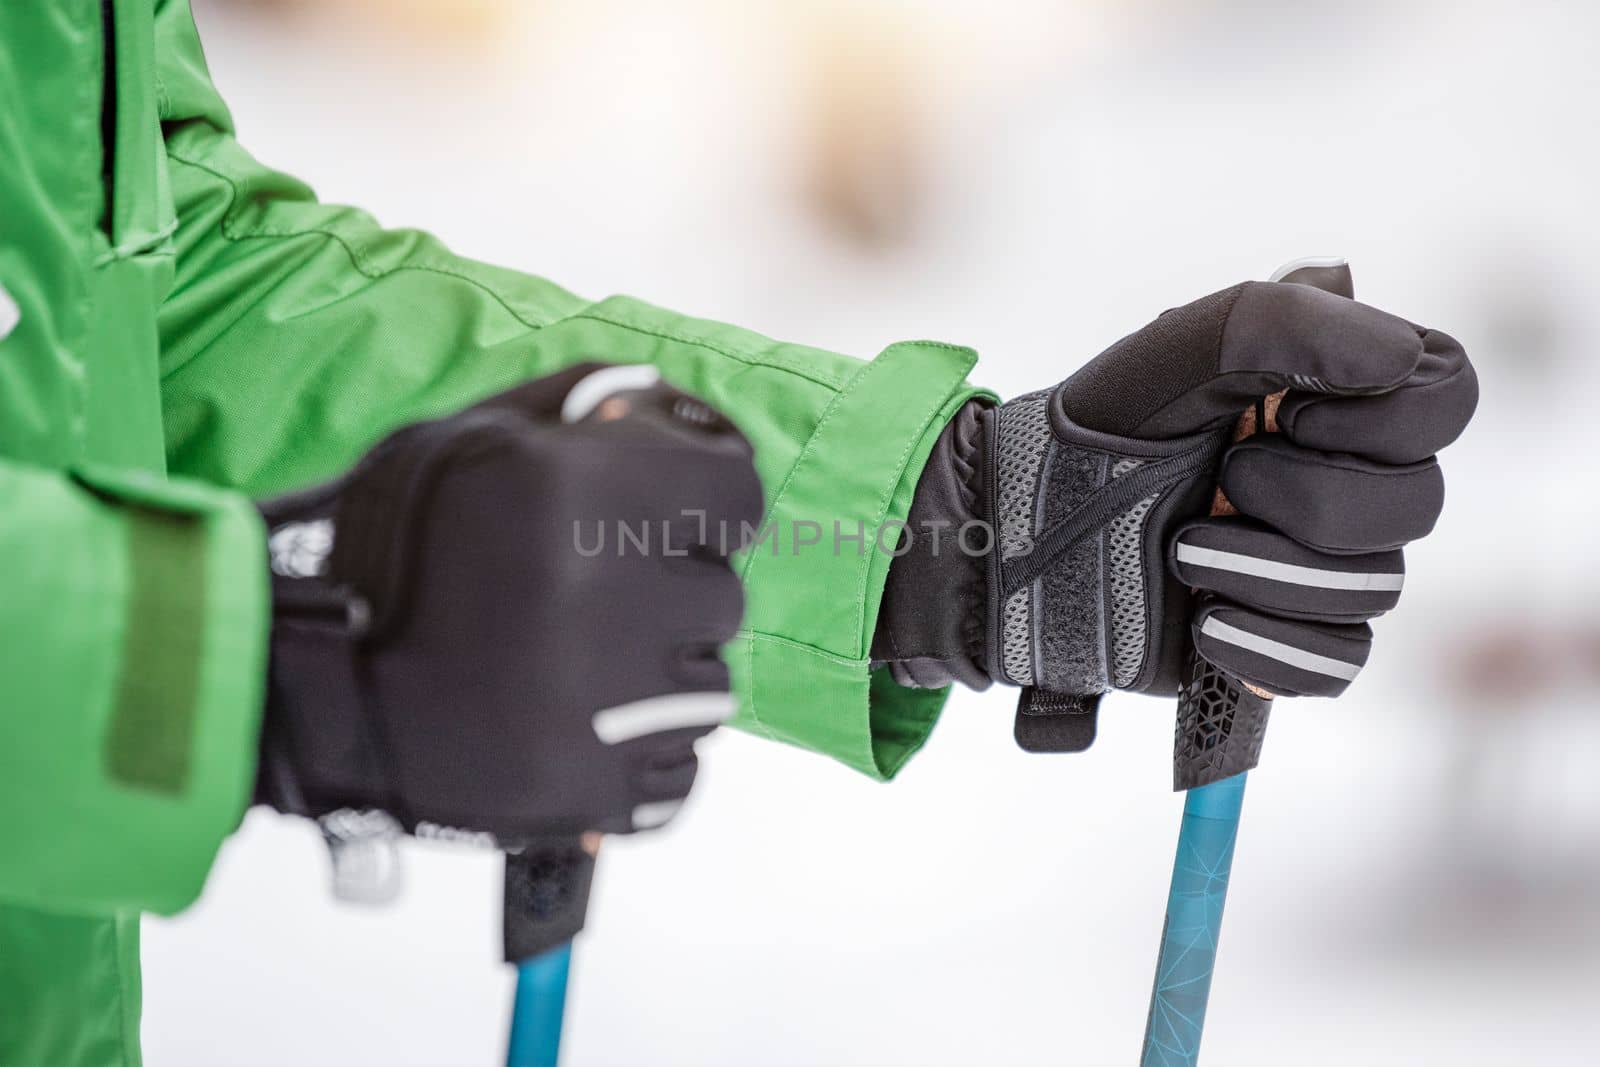 Nordic walking in winter. Sports activities in the winter on the snow. A man is engaged in Nordic walking with special sticks in the winter nature outdoors. Place for copy space. by SERSOL